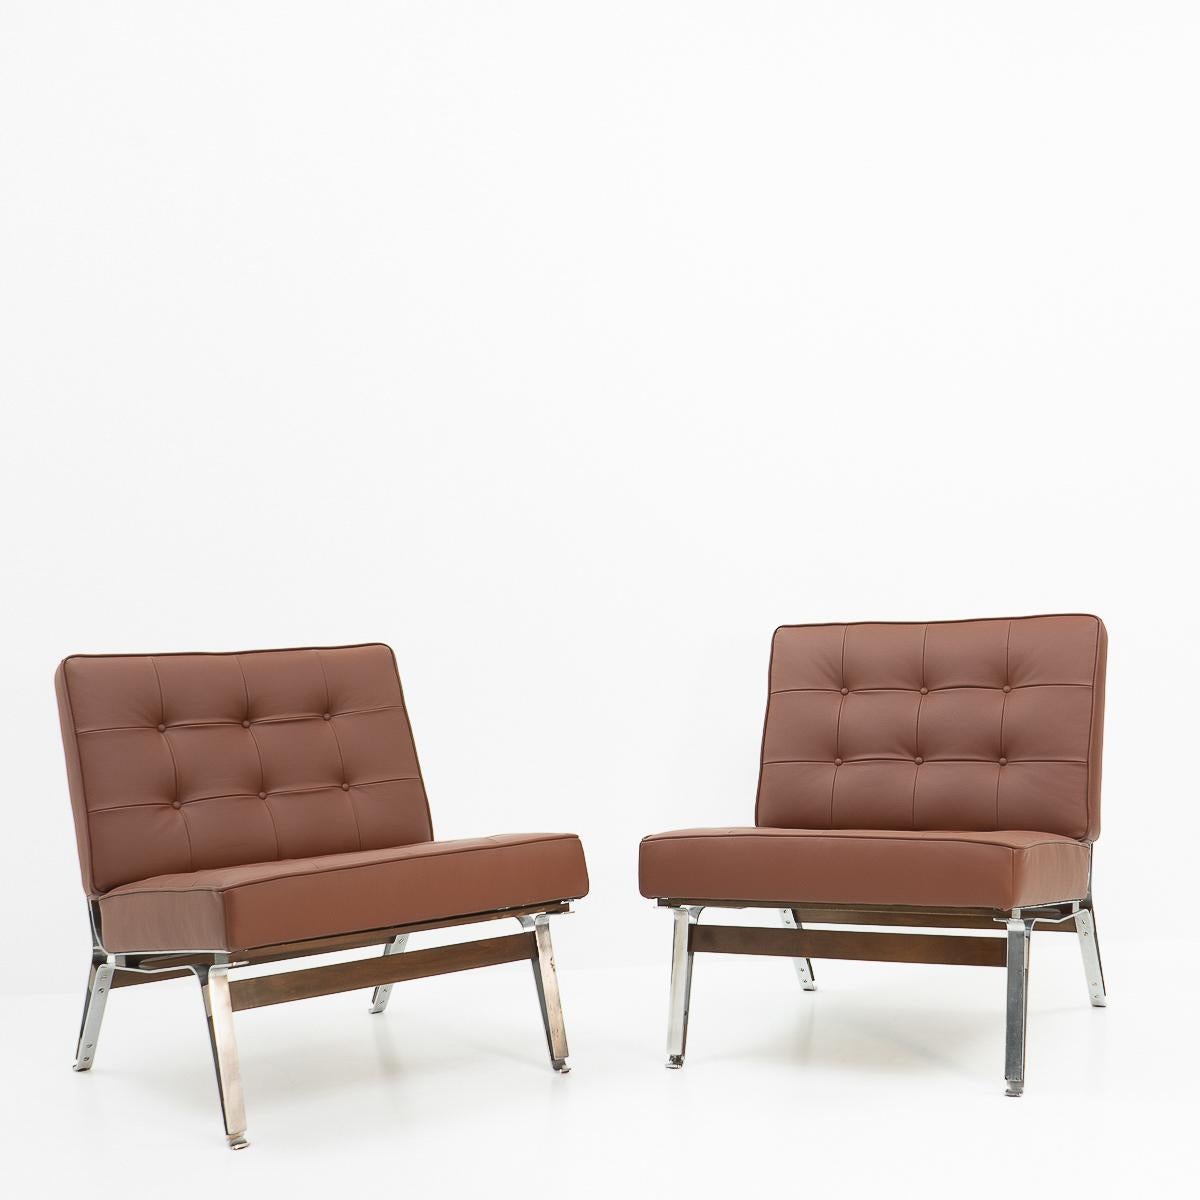 Rare Italian Design: Ico Parisi 856 Lounge Chairs for Cassina, 1950s In Good Condition For Sale In Renens, CH